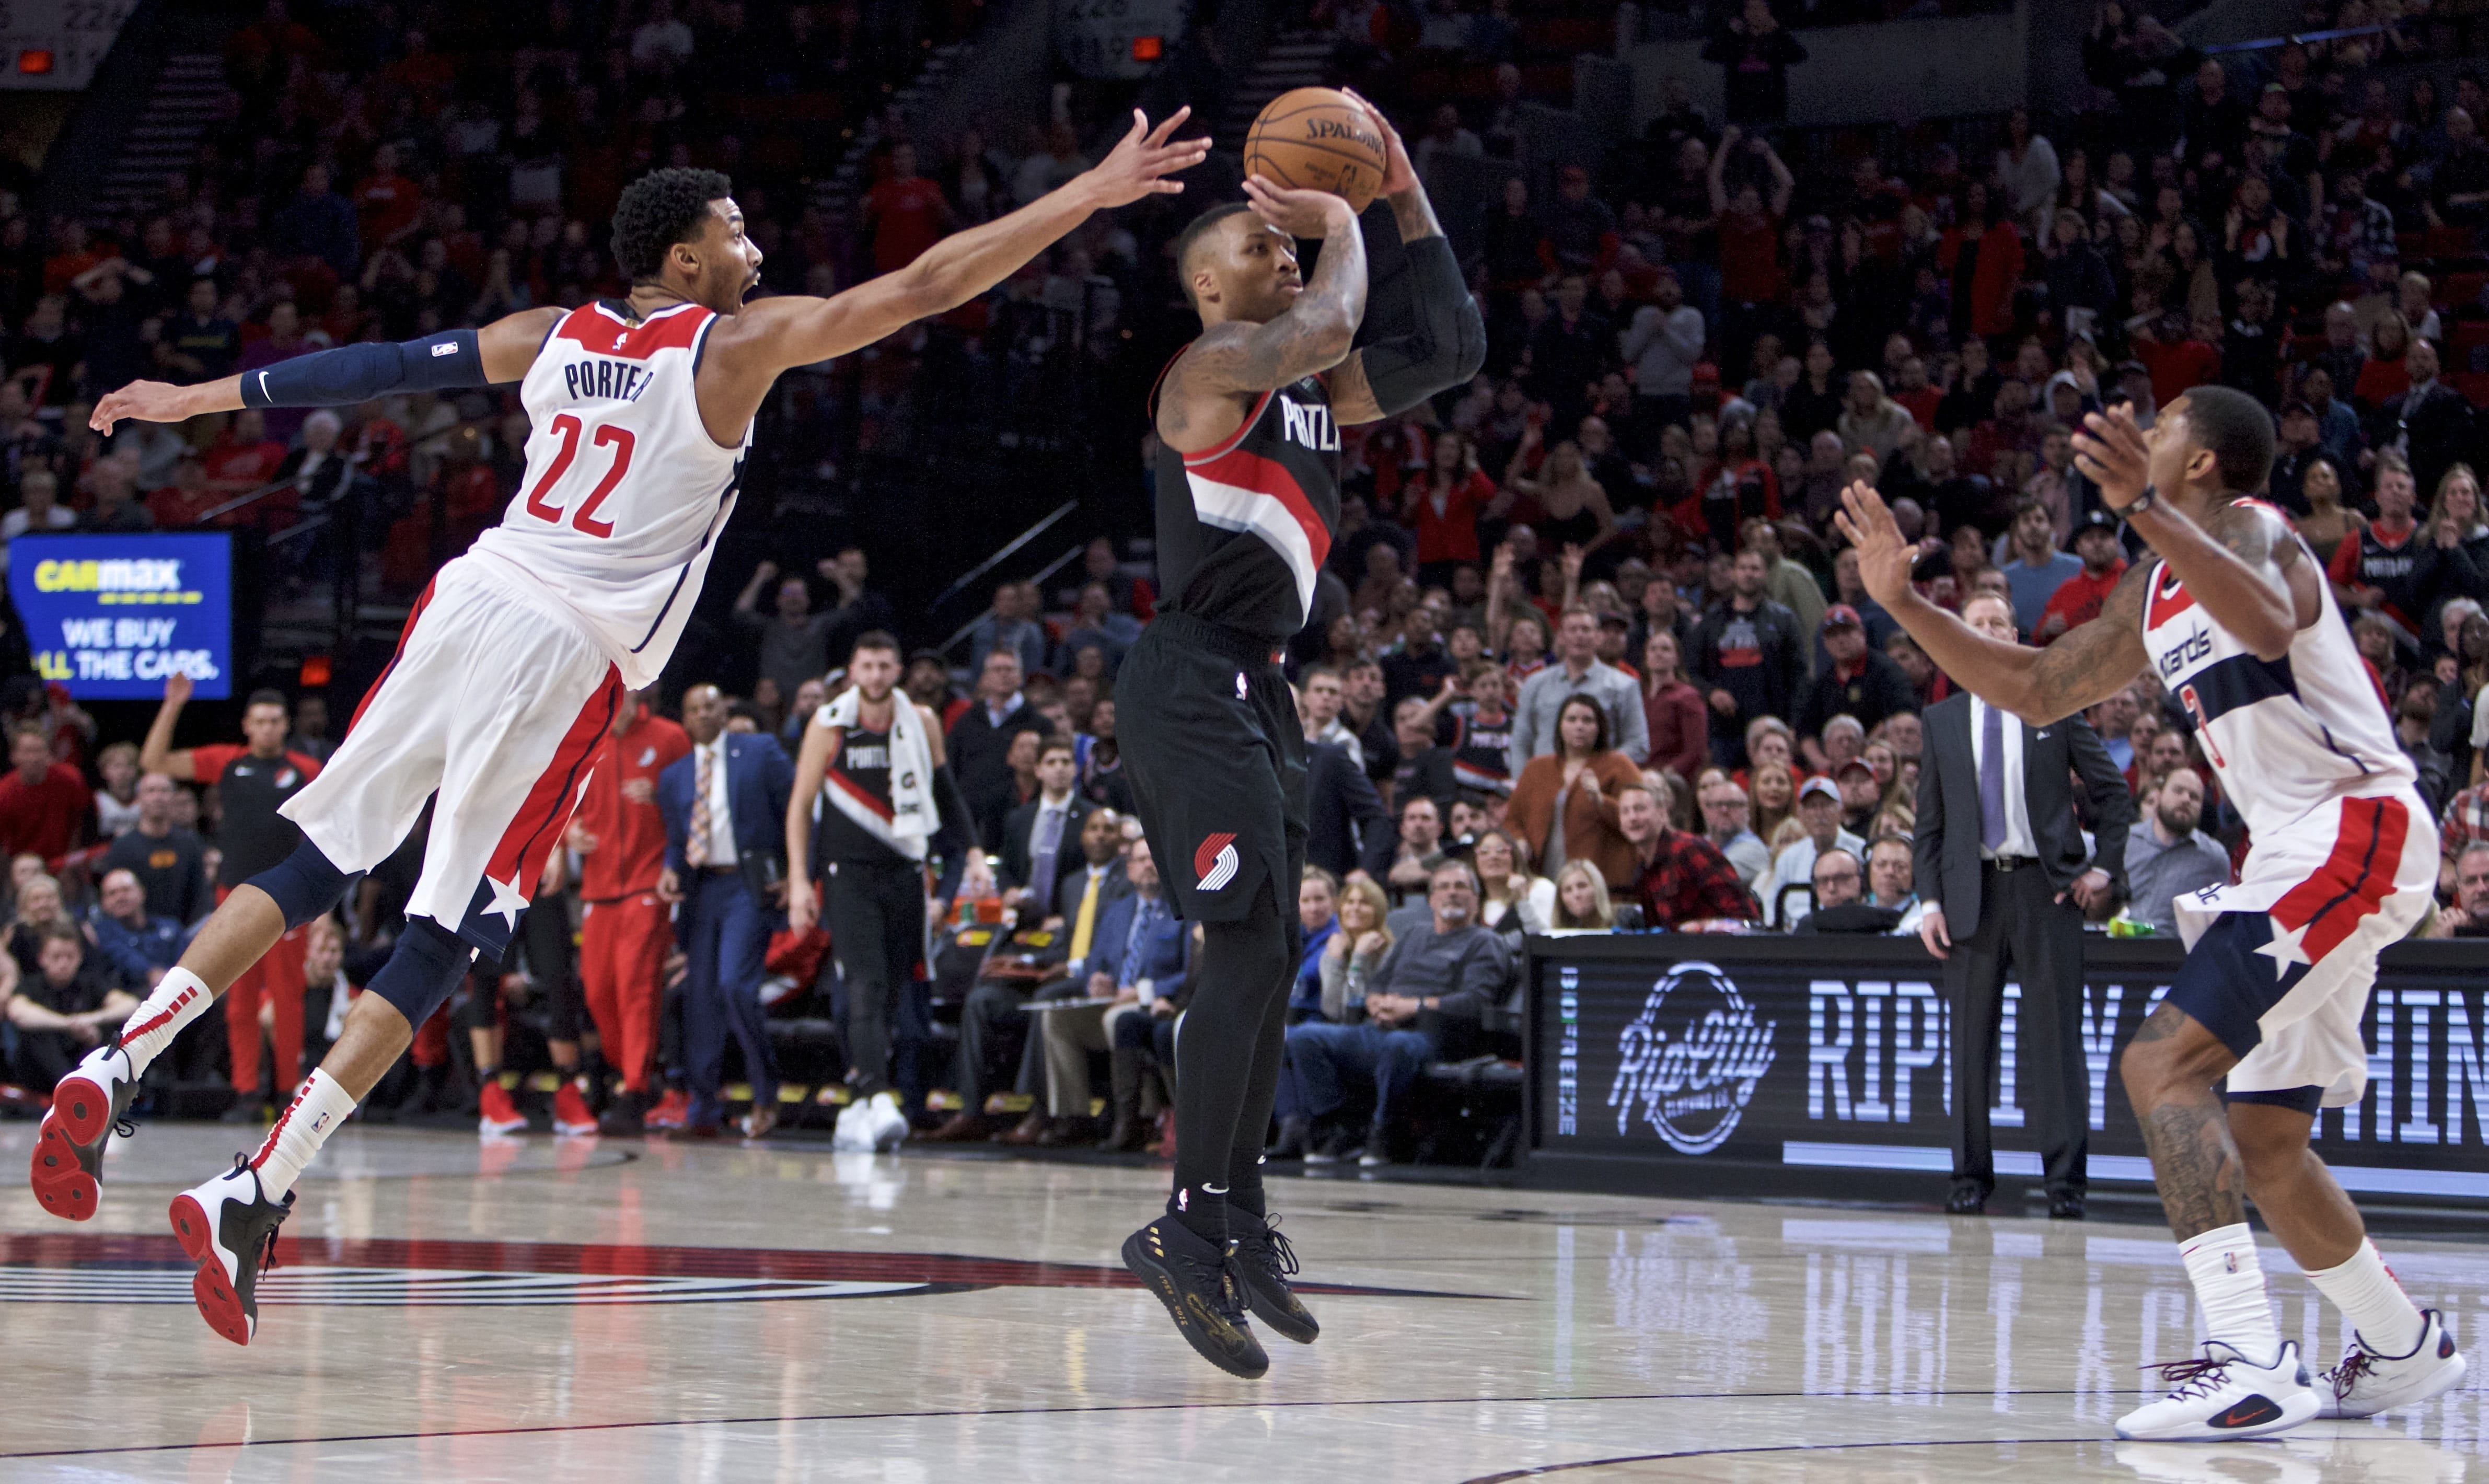 Portland Trail Blazers guard Damian Lillard, center, shoots over Washington Wizards forward Otto Porter Jr., left, and guard Bradley Beal, right, during the second half of an NBA basketball game in Portland, Ore., Monday, Oct. 22, 2018.